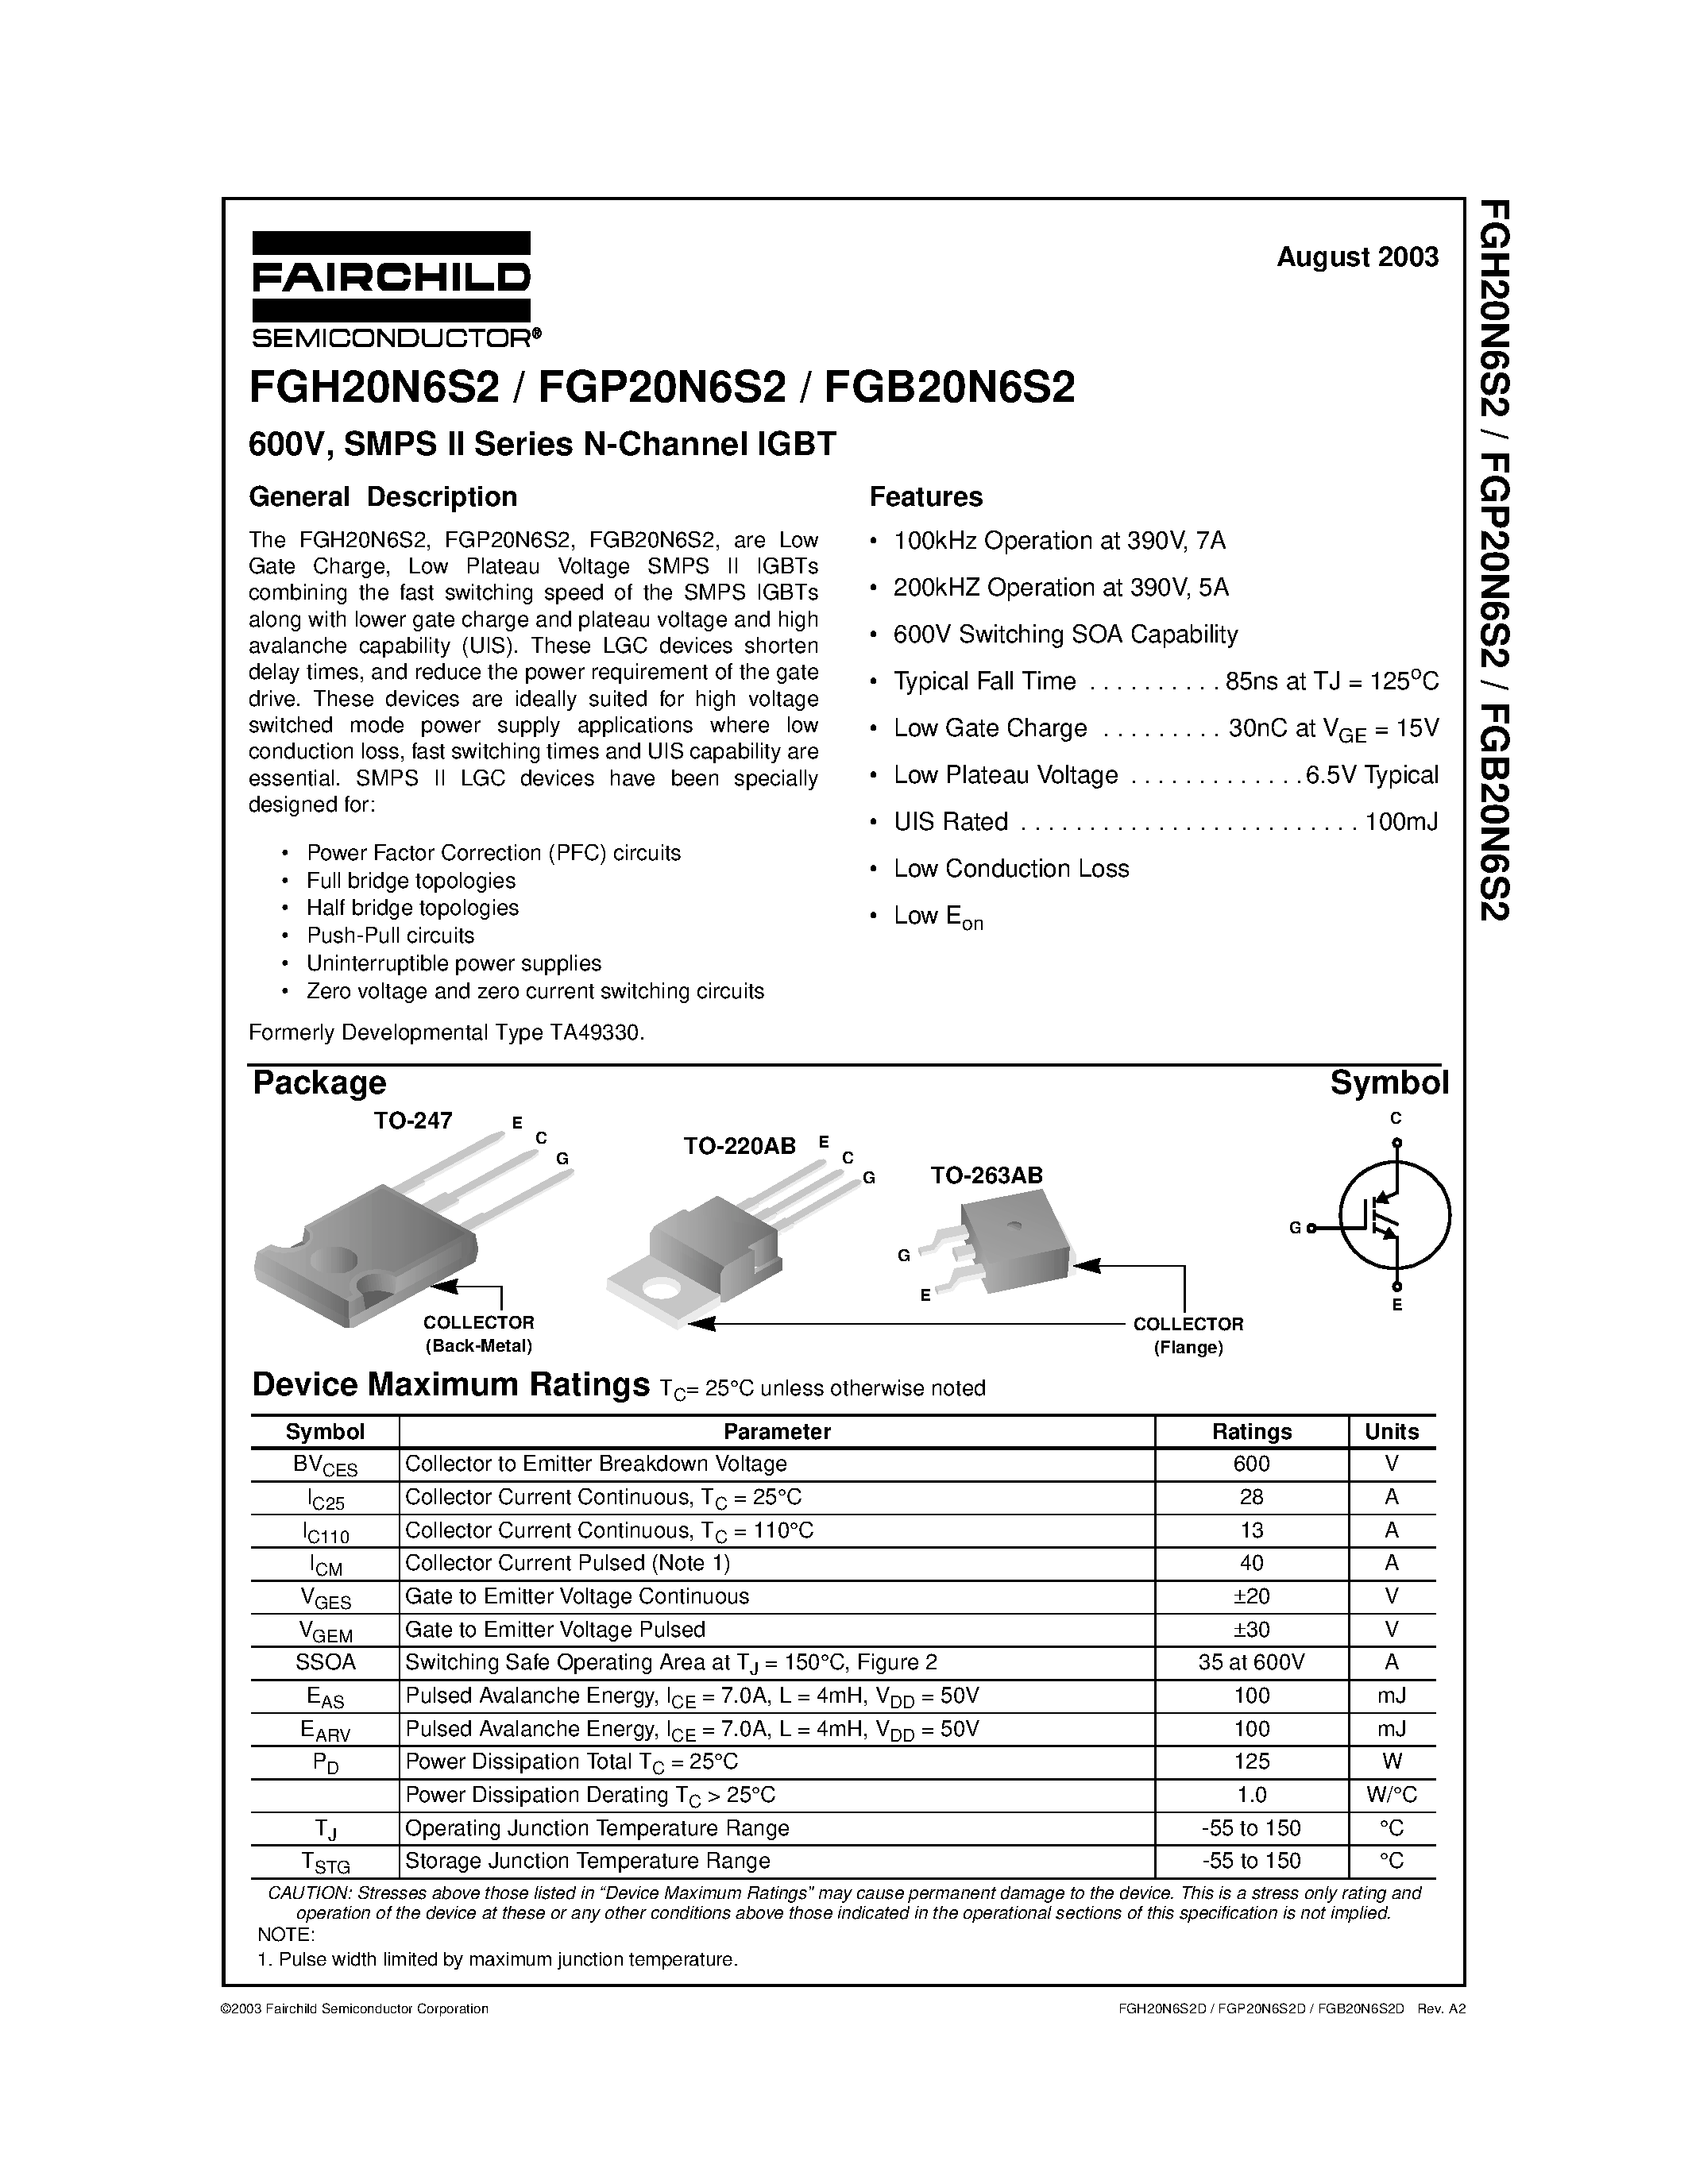 Datasheet FGB20N6S2 - 600V/ SMPS II Series N-Channel IGBT page 1